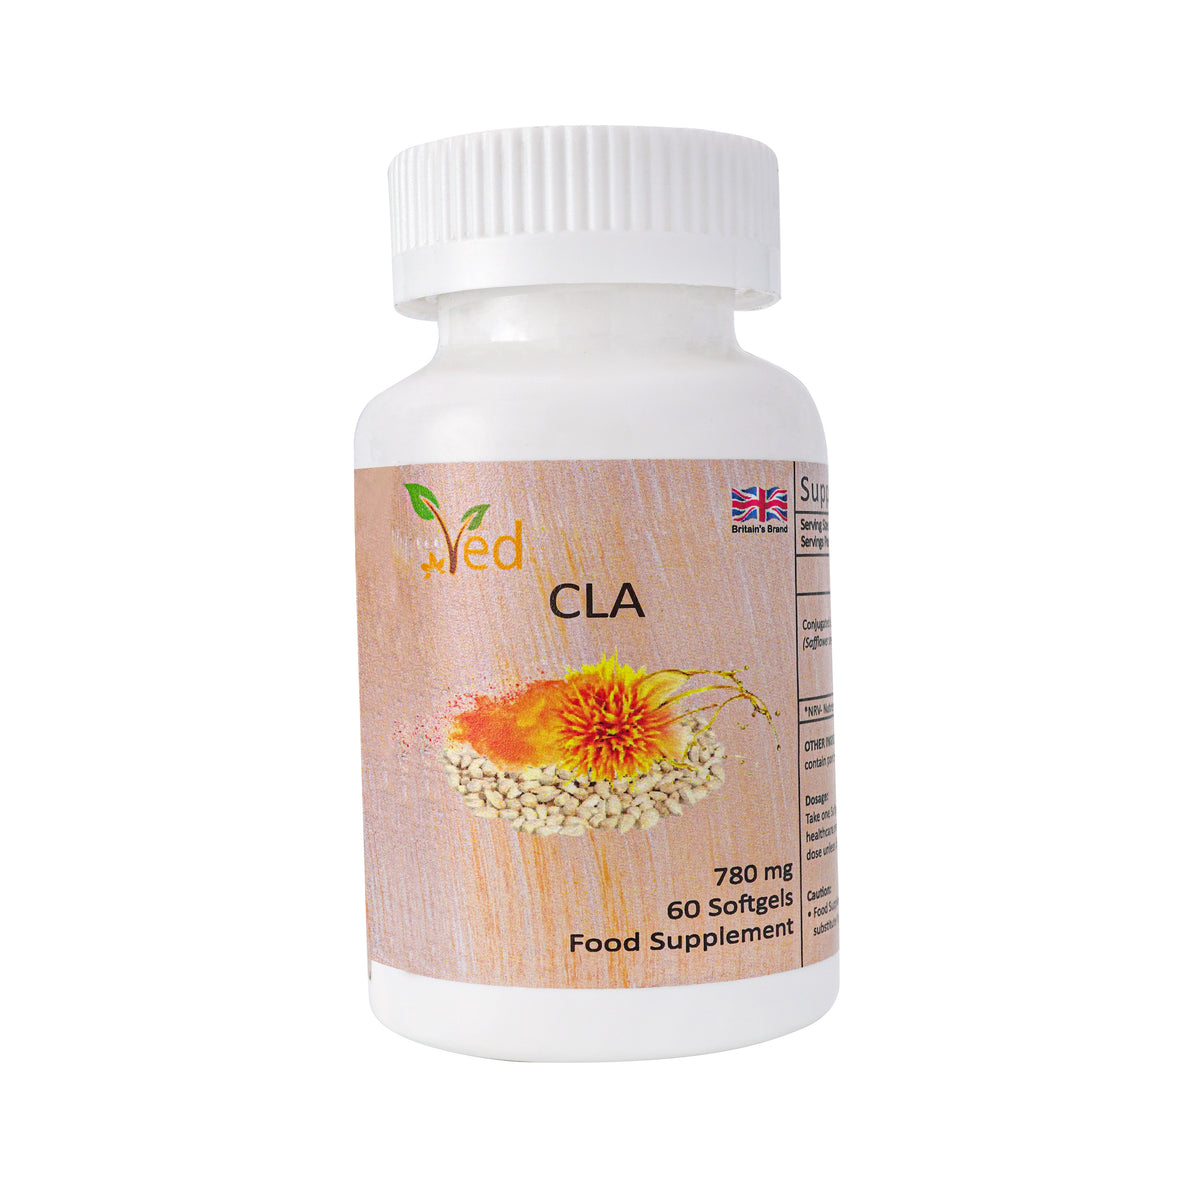 Ved CLA Conjugated Linoleic Acid, Weight Management Tablet, Natural 780 mg CLA from Safflower Oil, 60 Softgels (60 Day Supply)